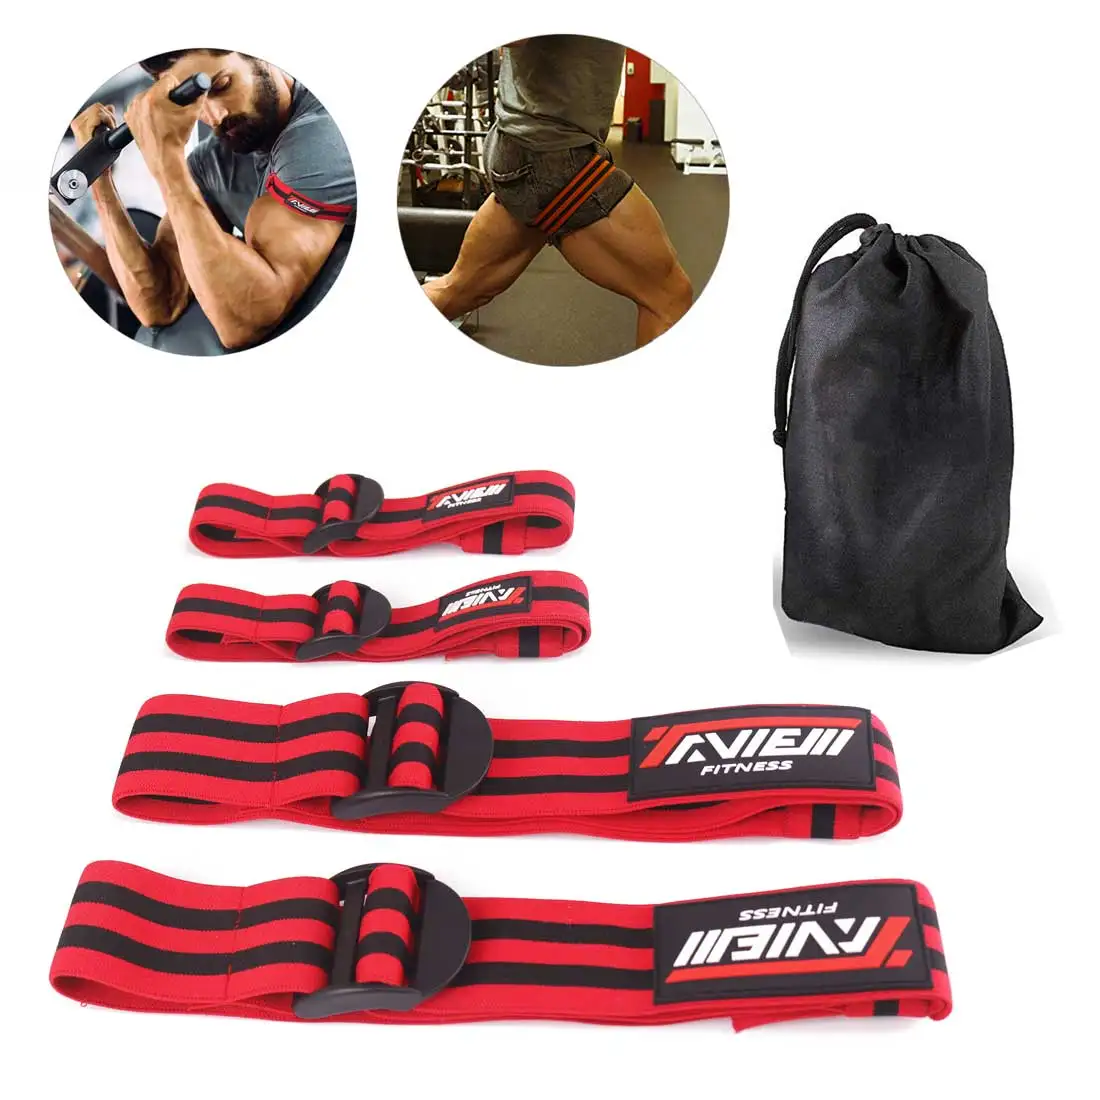 

Fitness Occlusion Bands Bodybuilding Weight Blood Flow Restriction Bands Arm Leg Wraps Fast Muscle Growth Gym Equipment